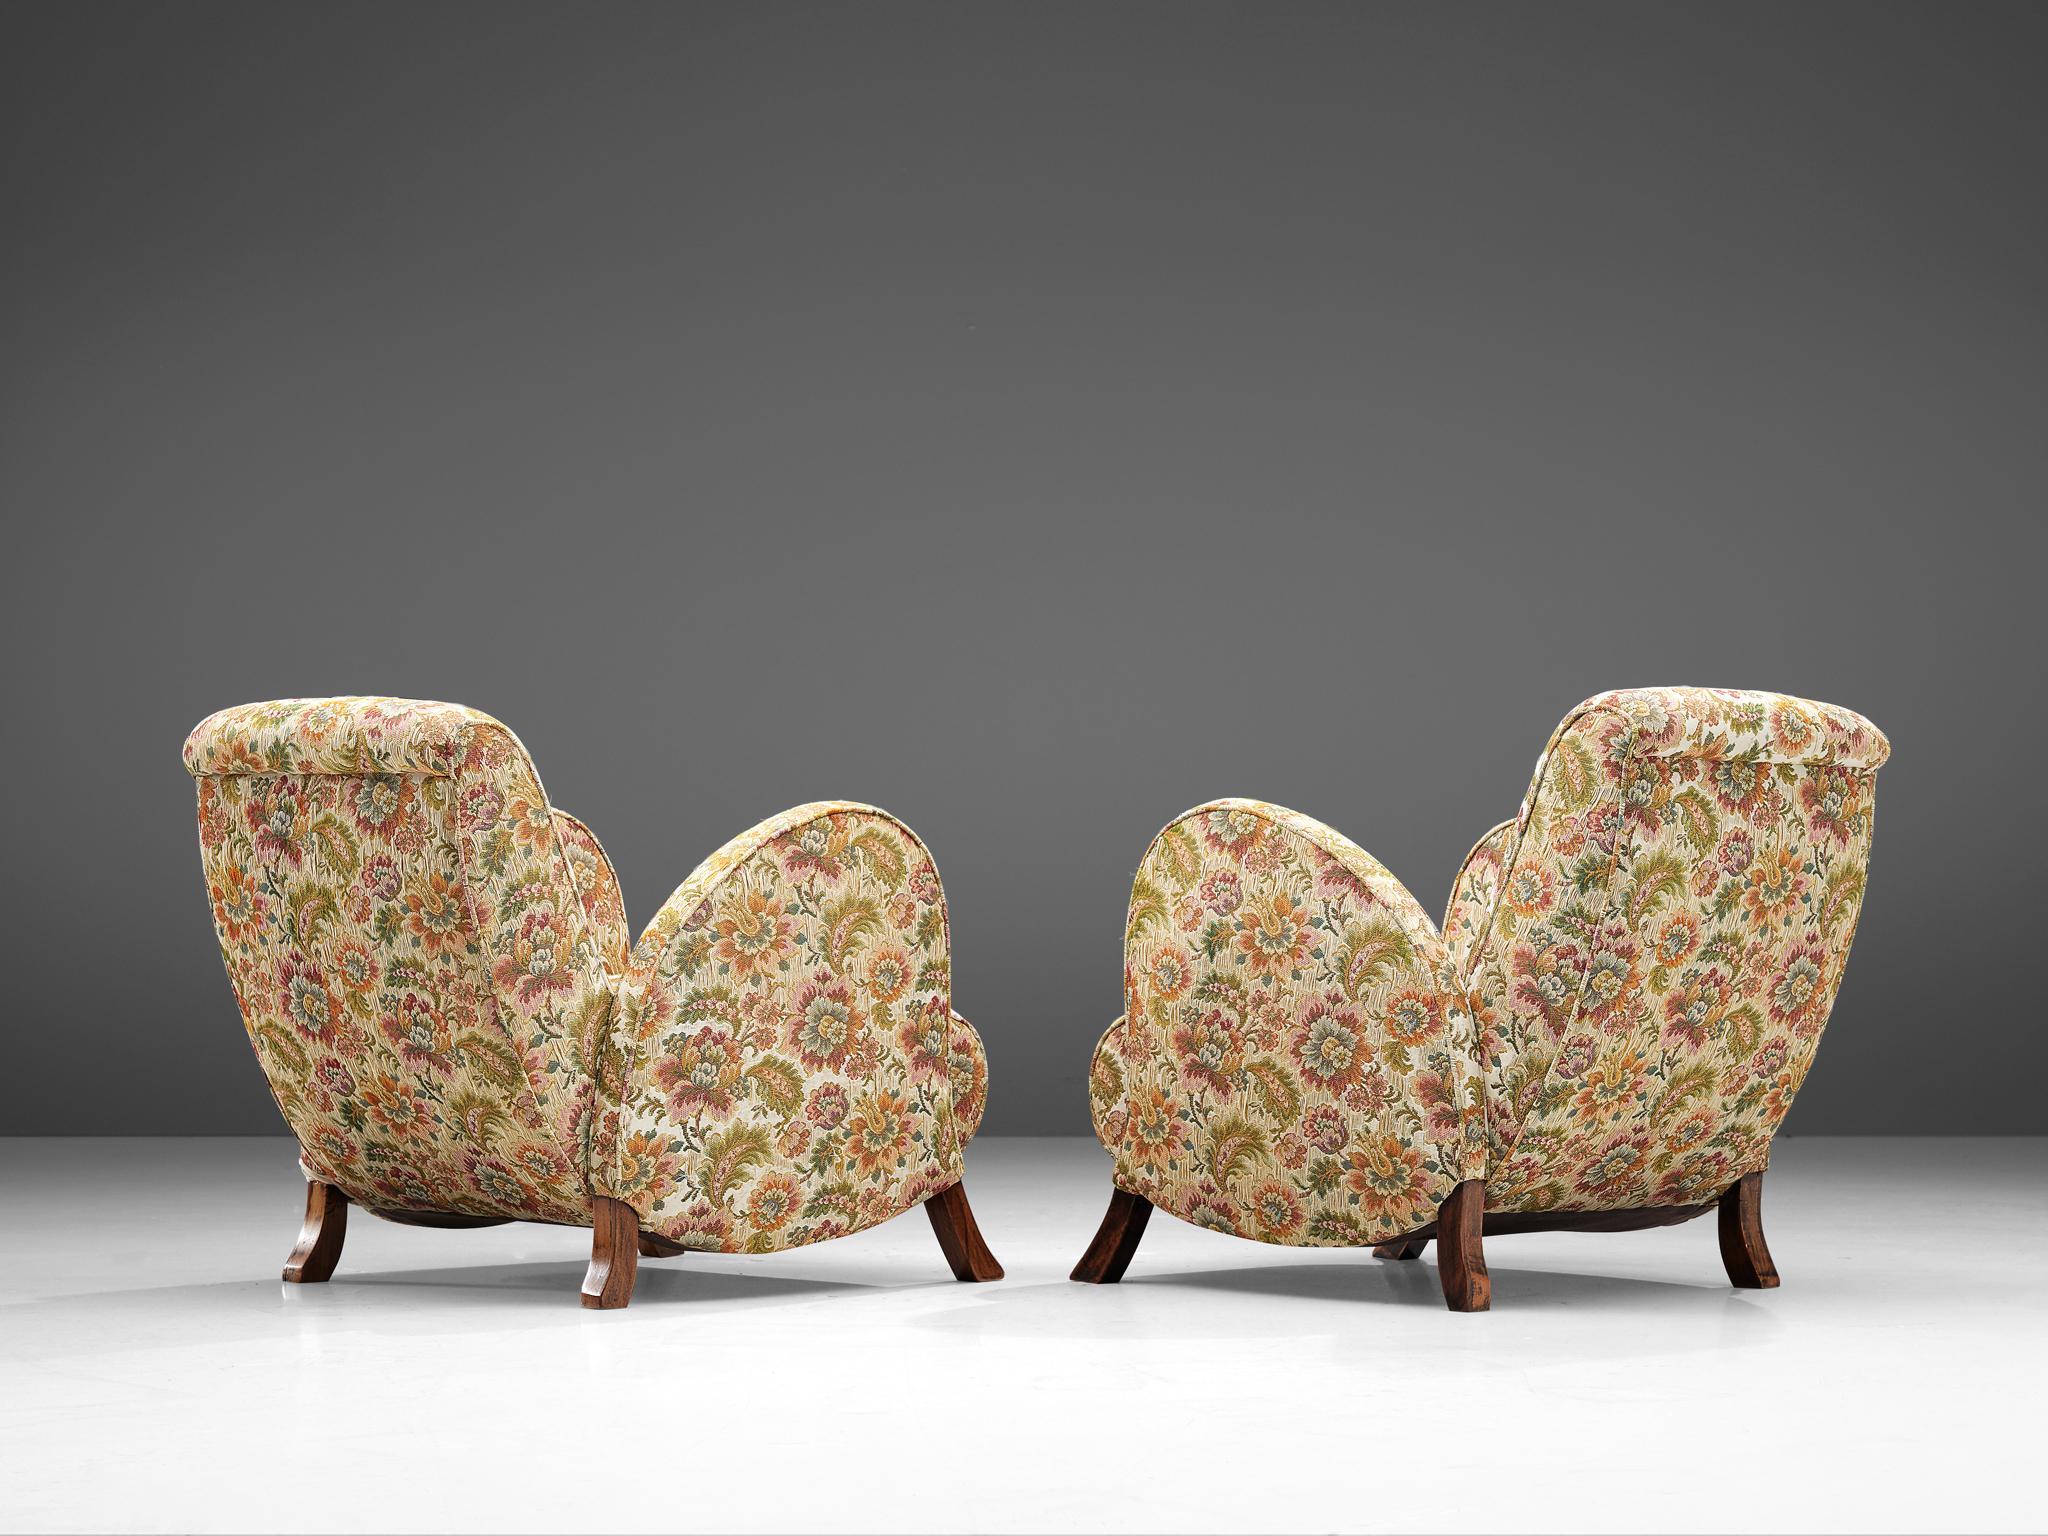 Mid-Century Modern Pair of Italian Curved Armchairs in Floral Upholstery, 1950s